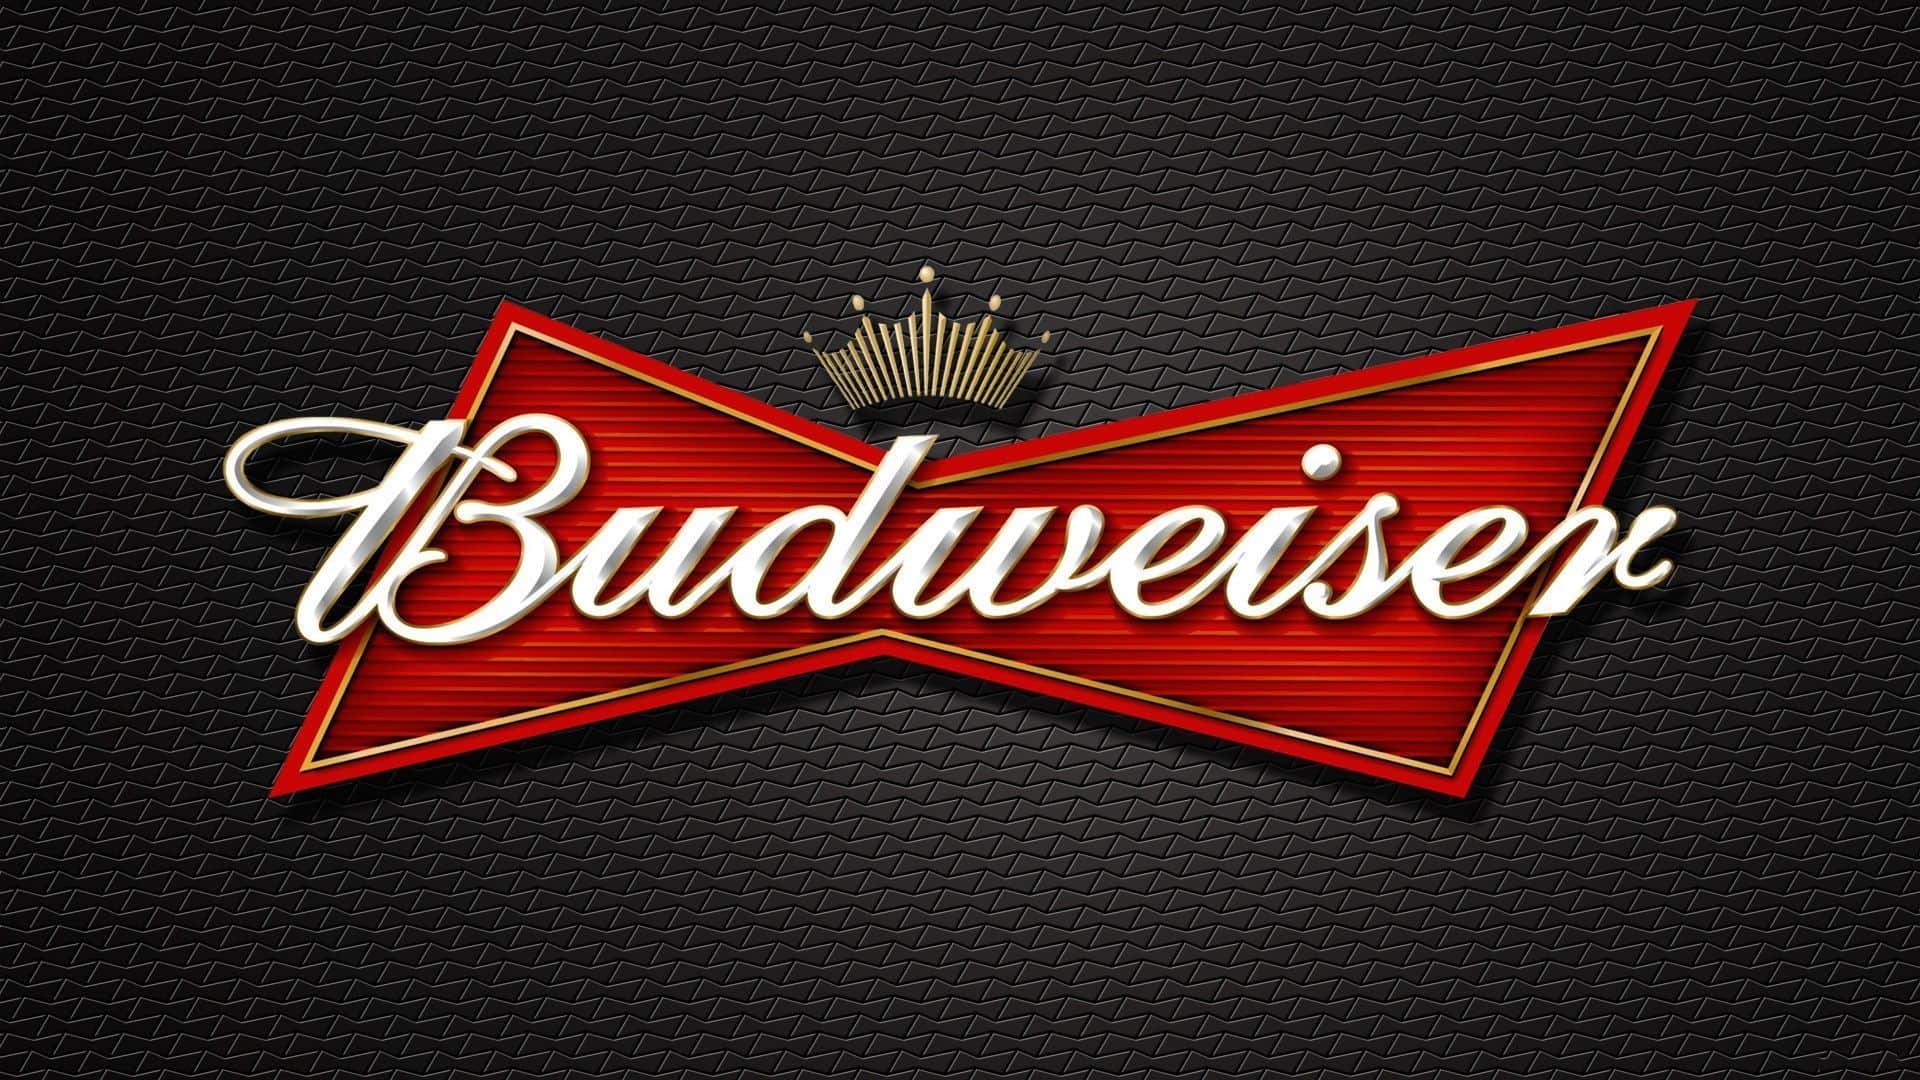 Budweiser partners with 22 musicians for new NFT collection